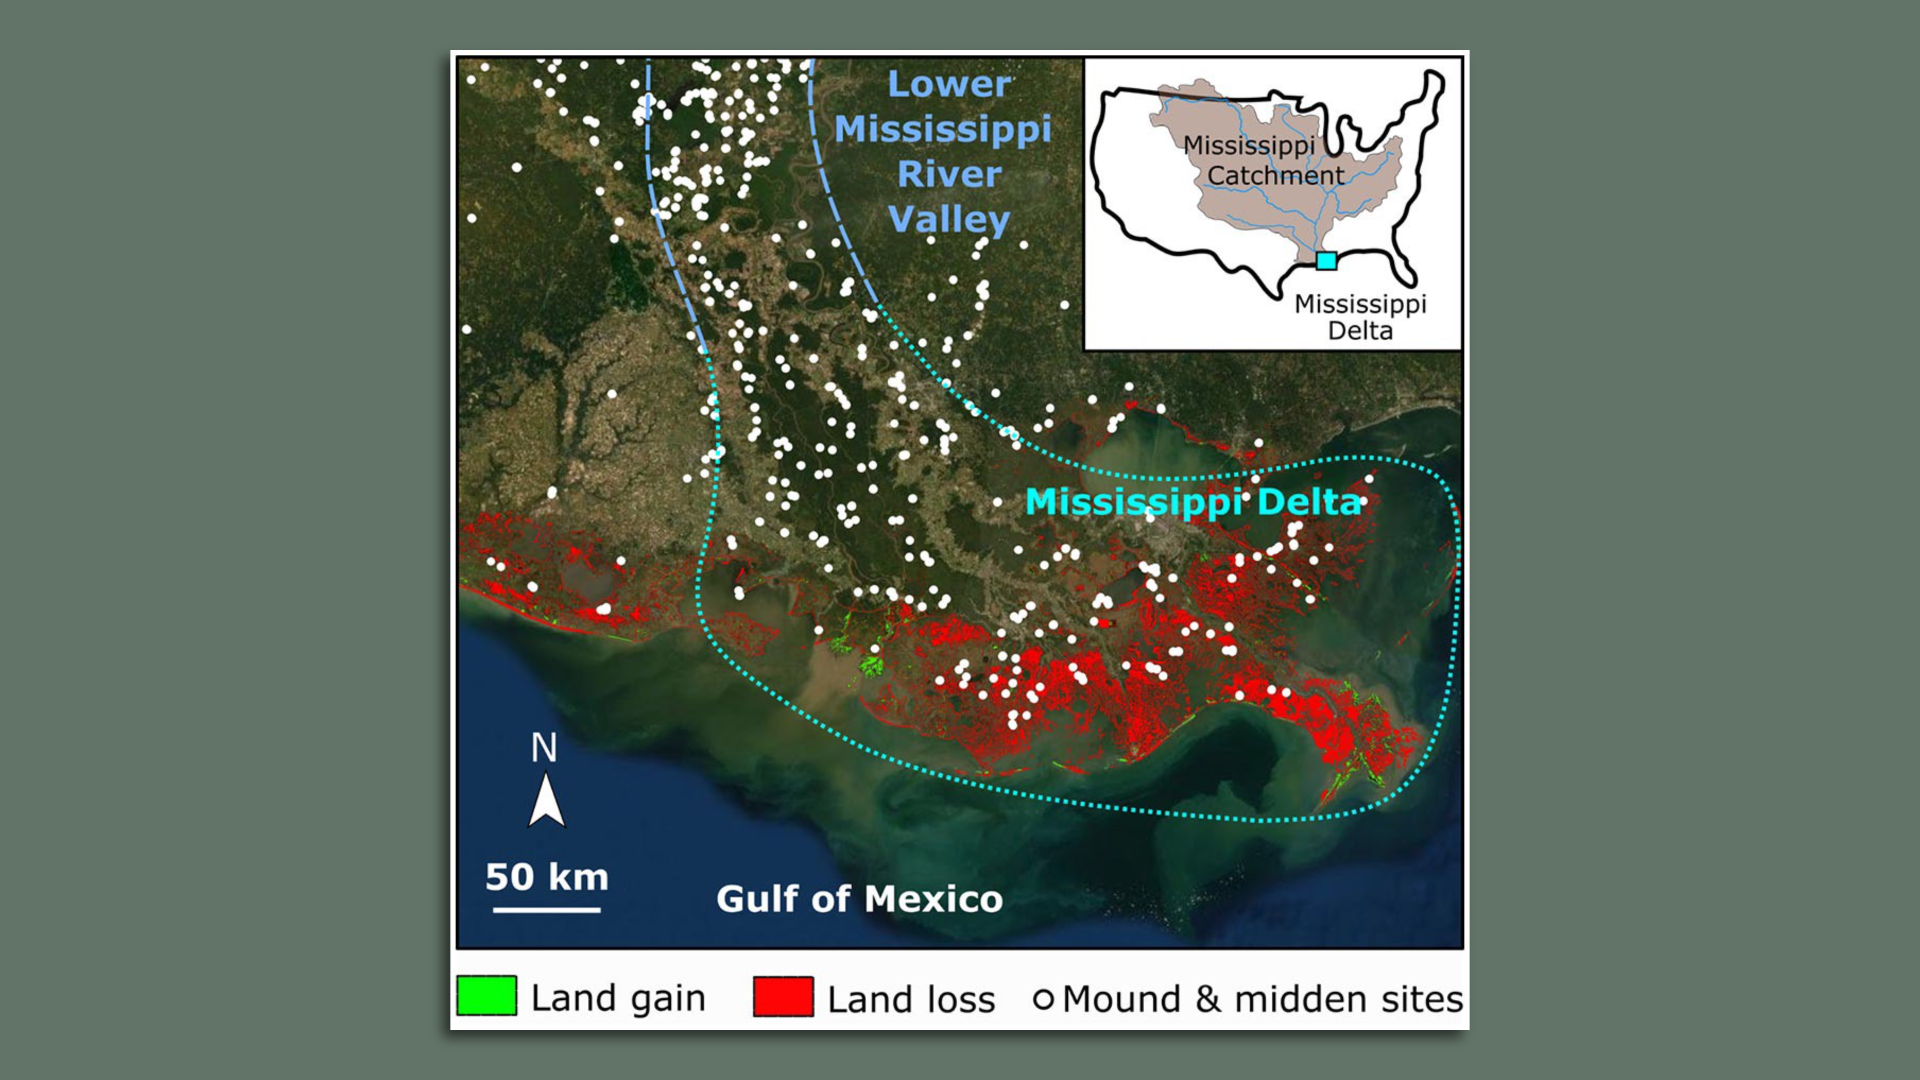 Image shows a graphic of south Louisiana with the boot highlighted. White dots along the Mississippi River banks indicate mound and midden sites.